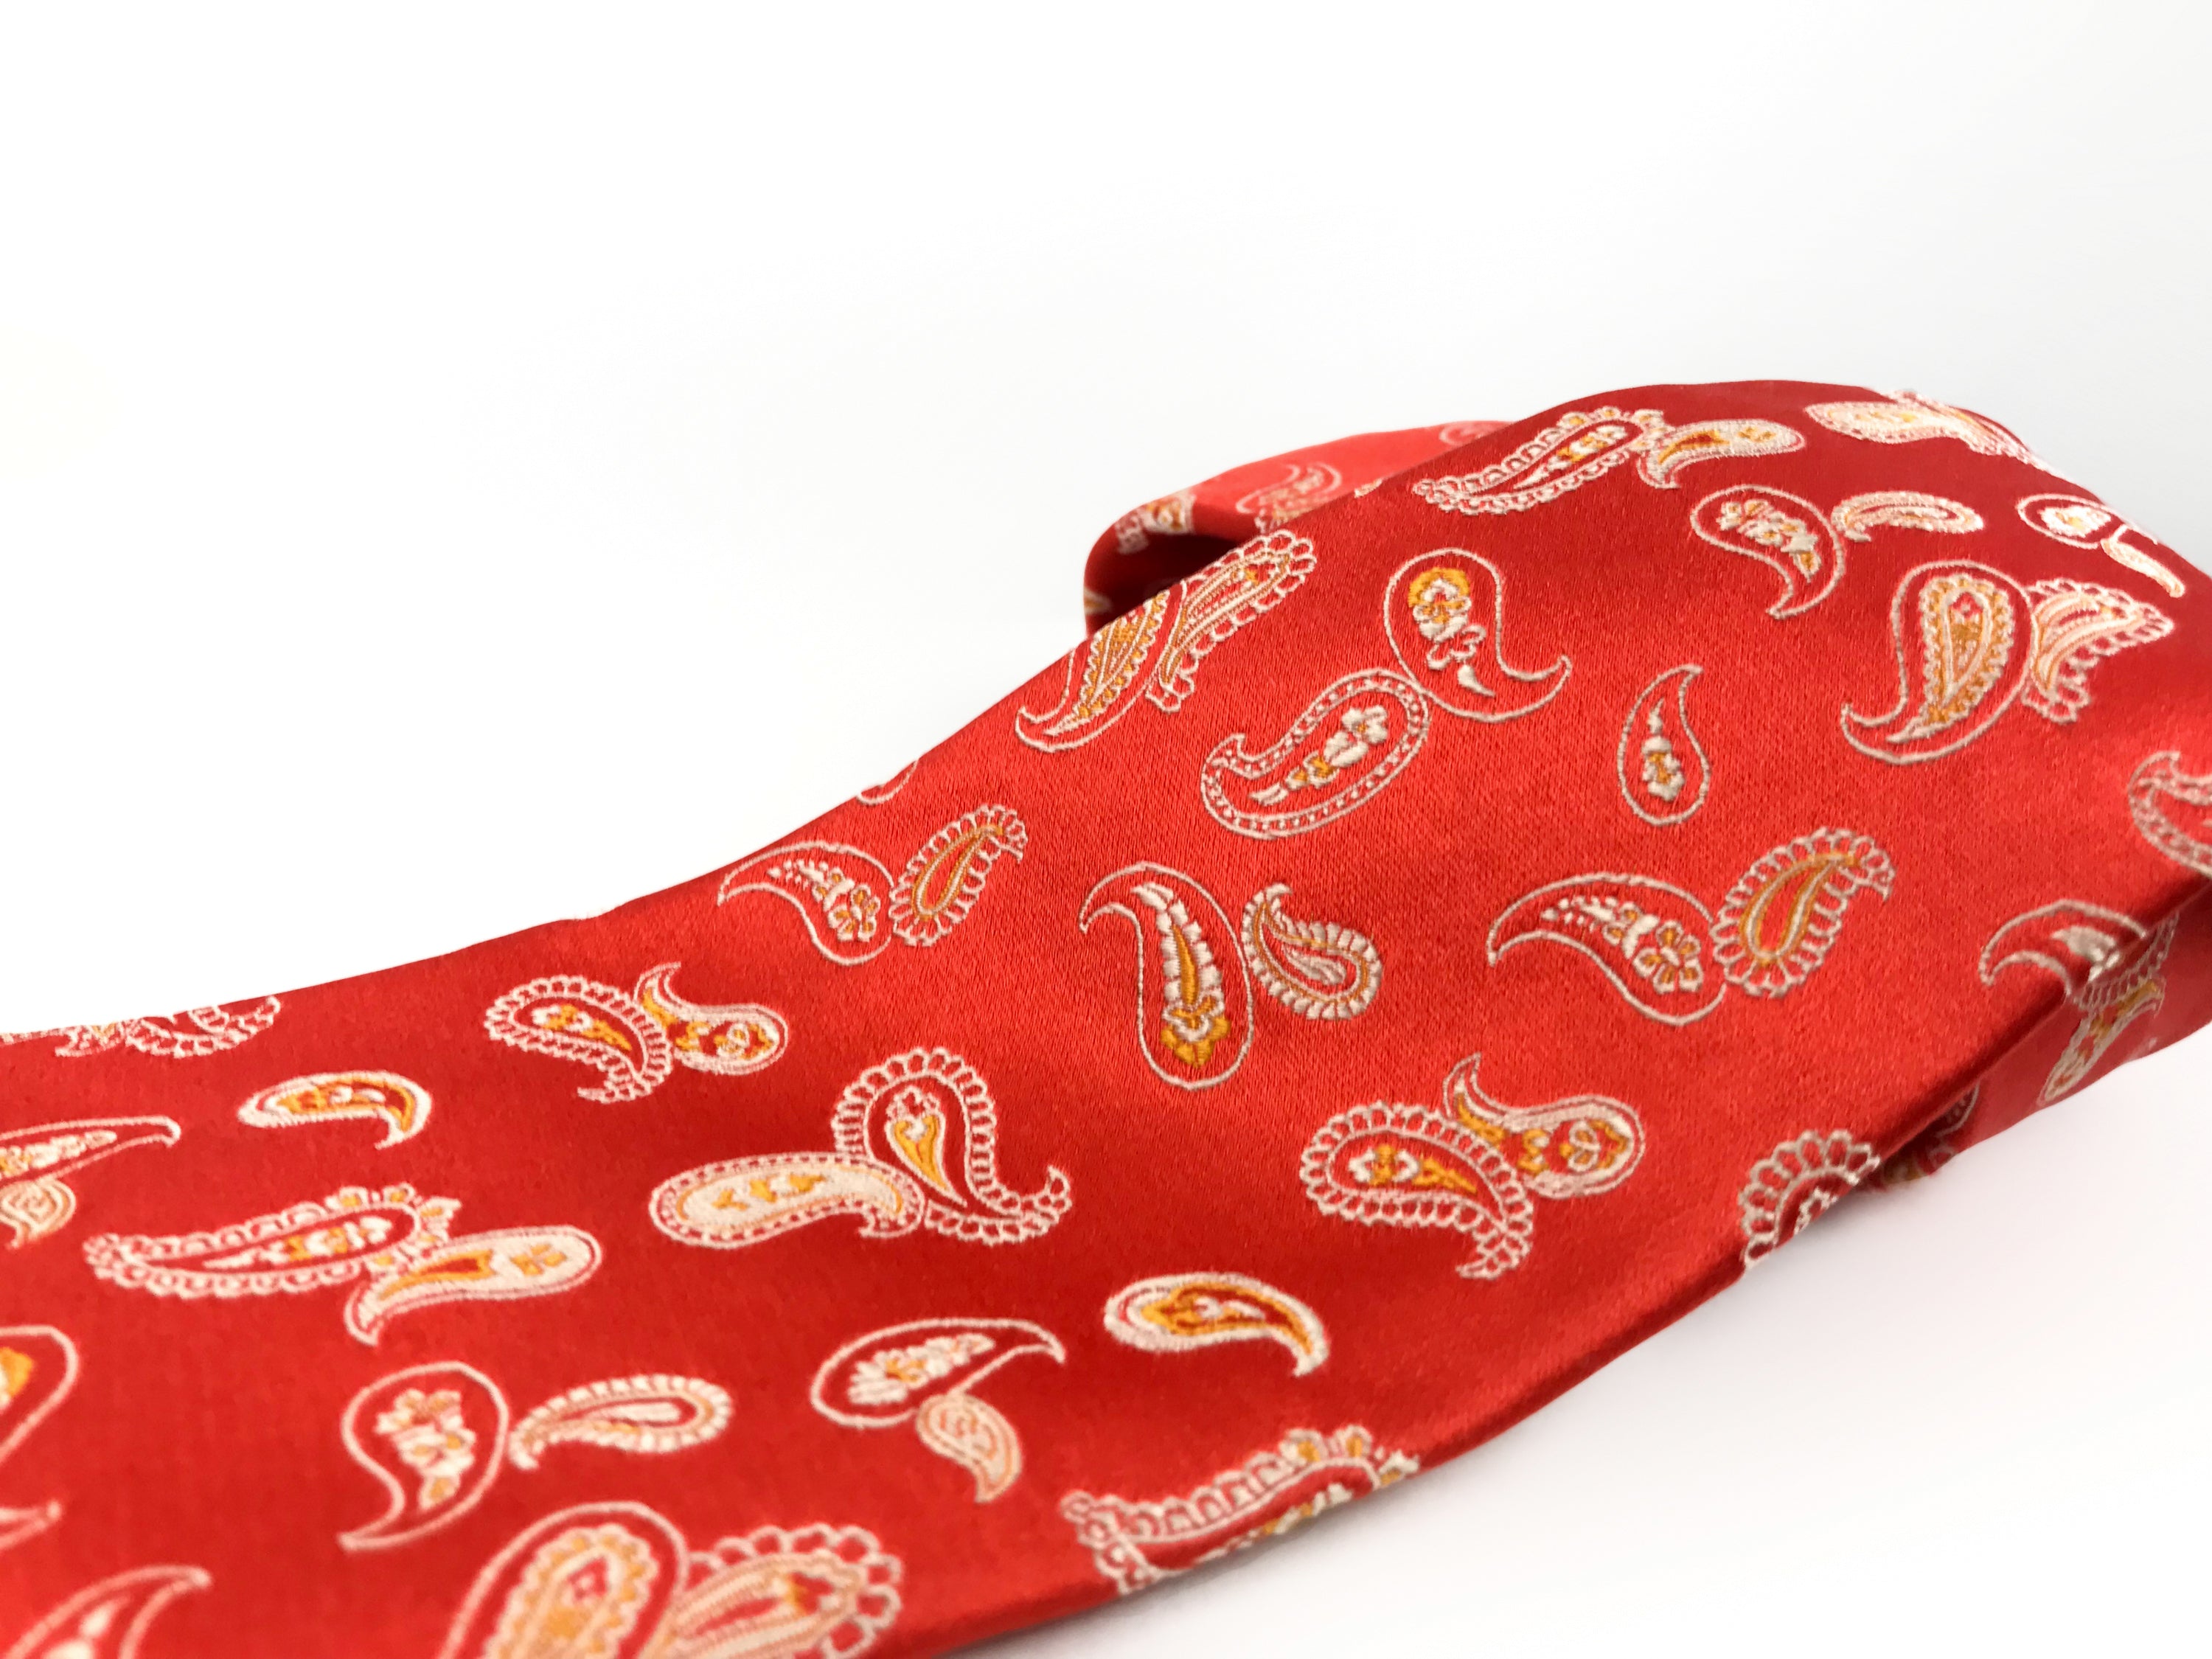 Kiton Napoli Coral Woven Silk Paisley Embroidered Tie - secondfirst